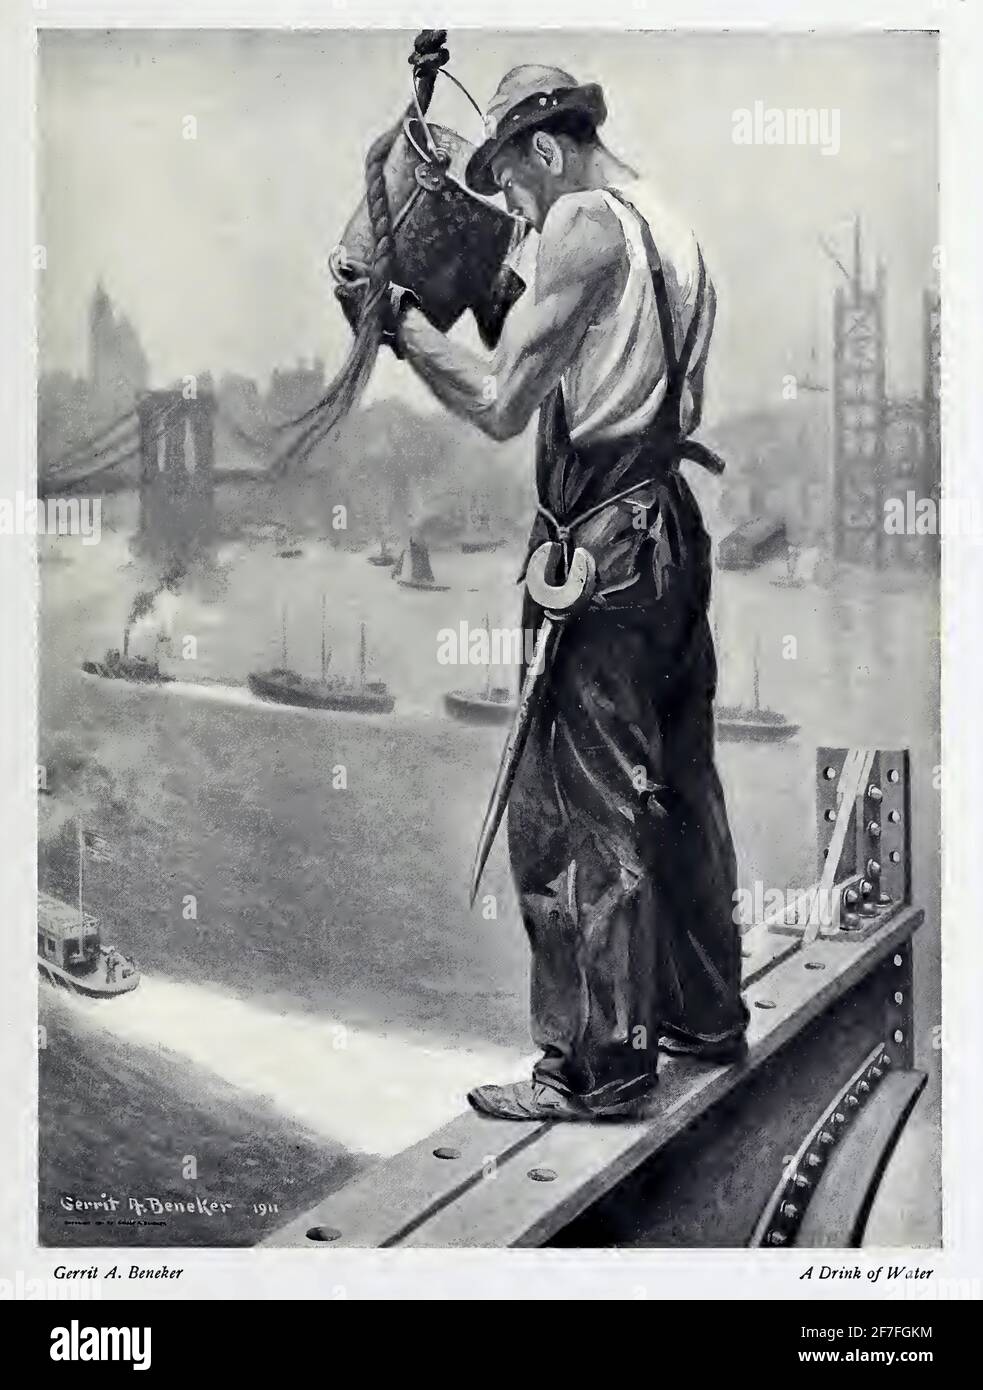 A Drink of Water by Gerrit Beneker. A steeplejack high above the New York skyline stops work to quench his thirst from a bucket of water. Stock Photo